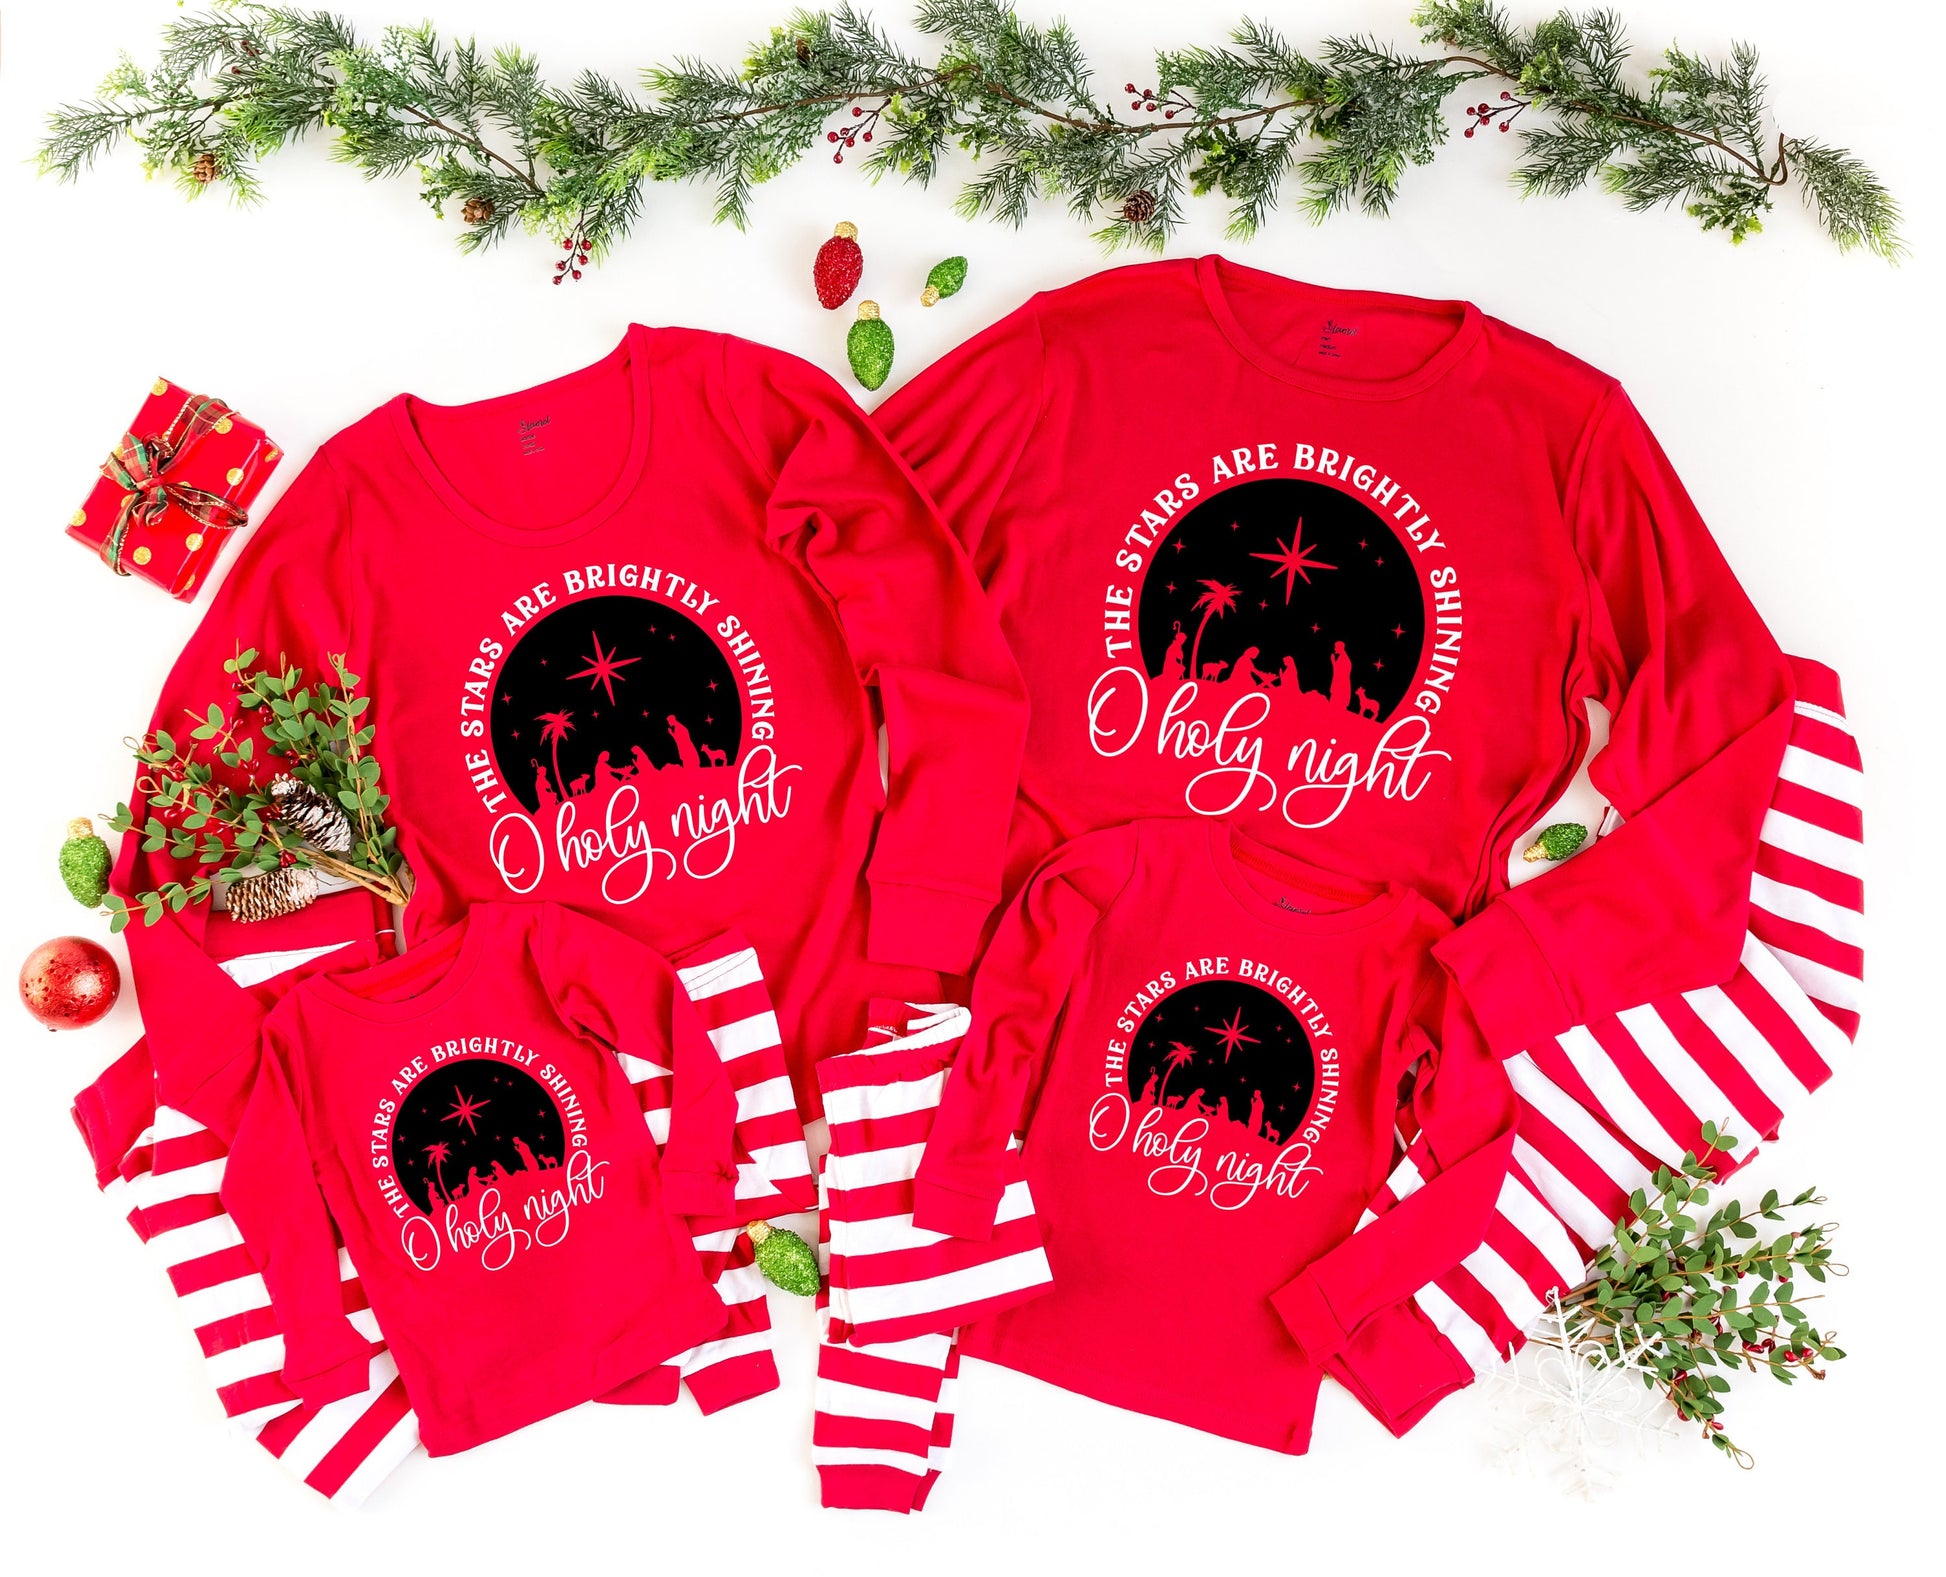 The Stars are Brightly Shining matching Family Christmas Pajamas - religious christmas pjs - adult christmas pajamas - holiday family pjs